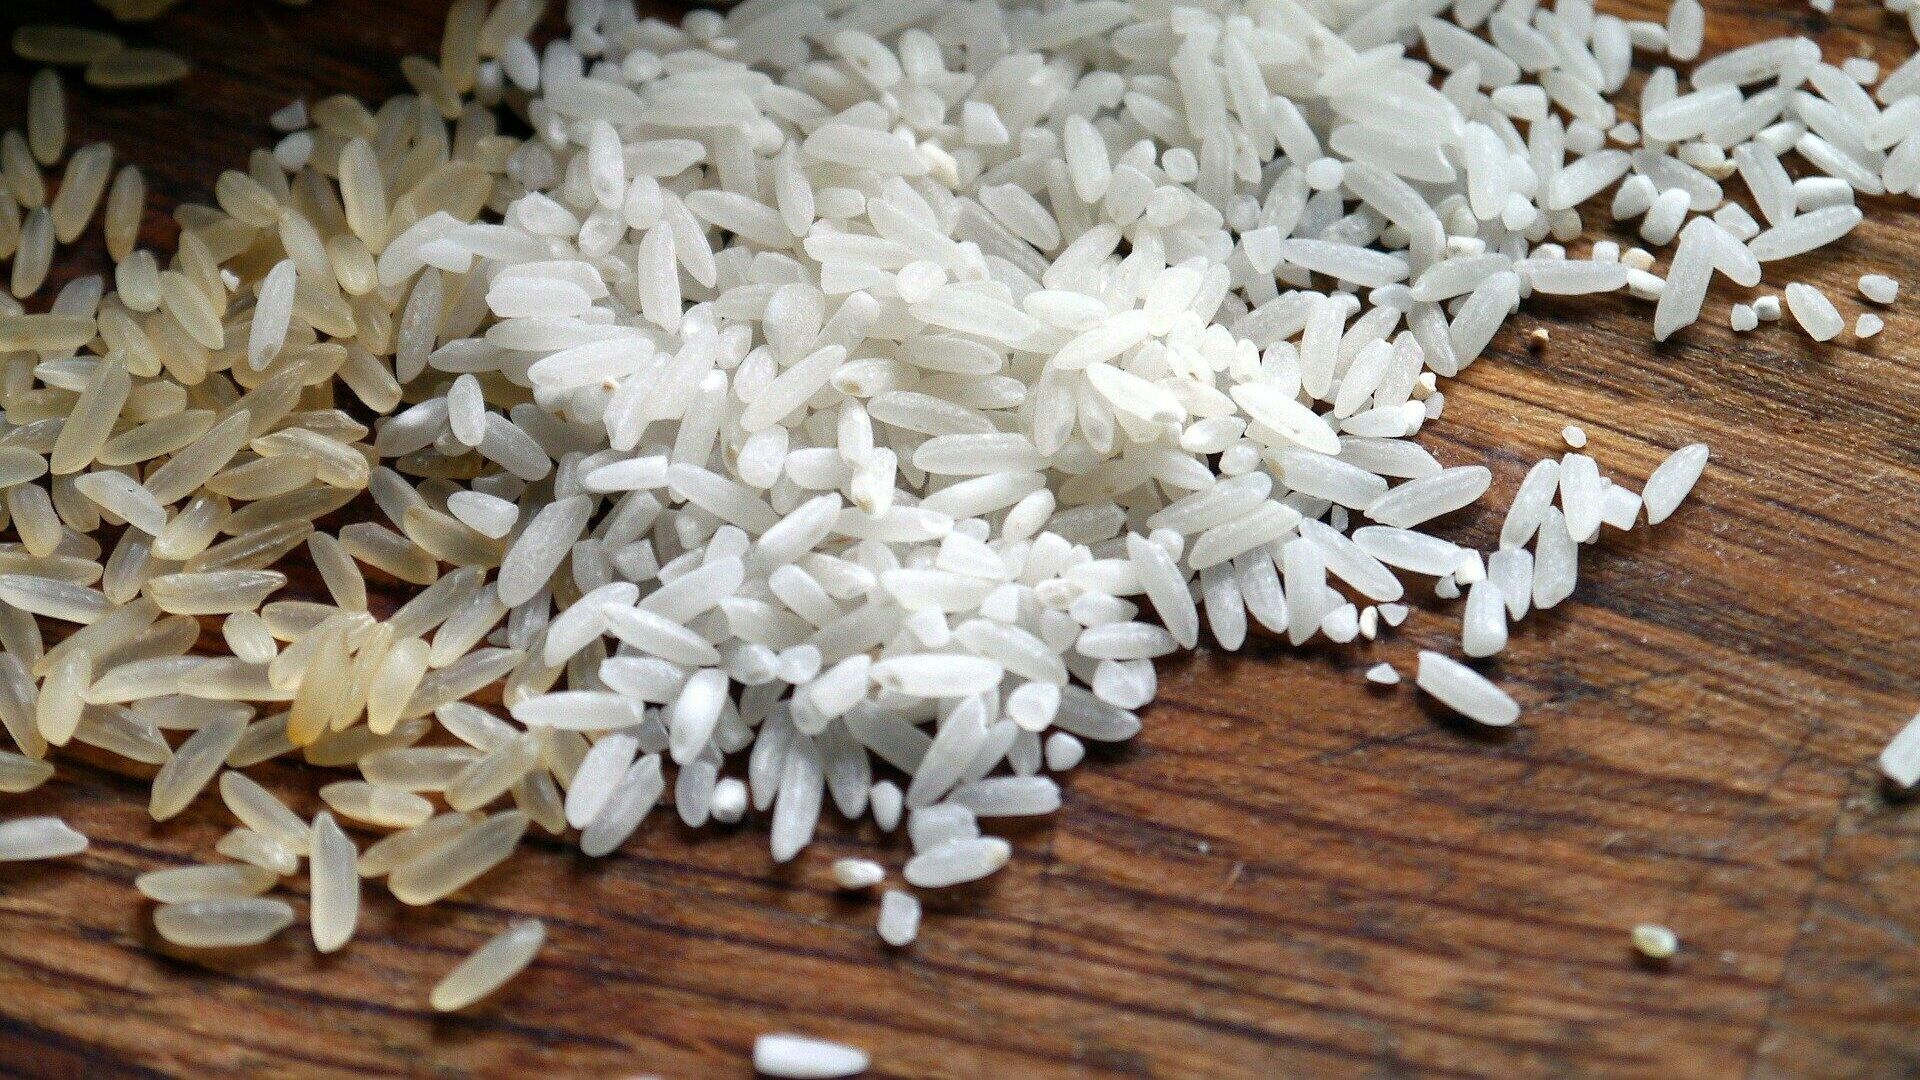 Rice prices hit a 15-year high